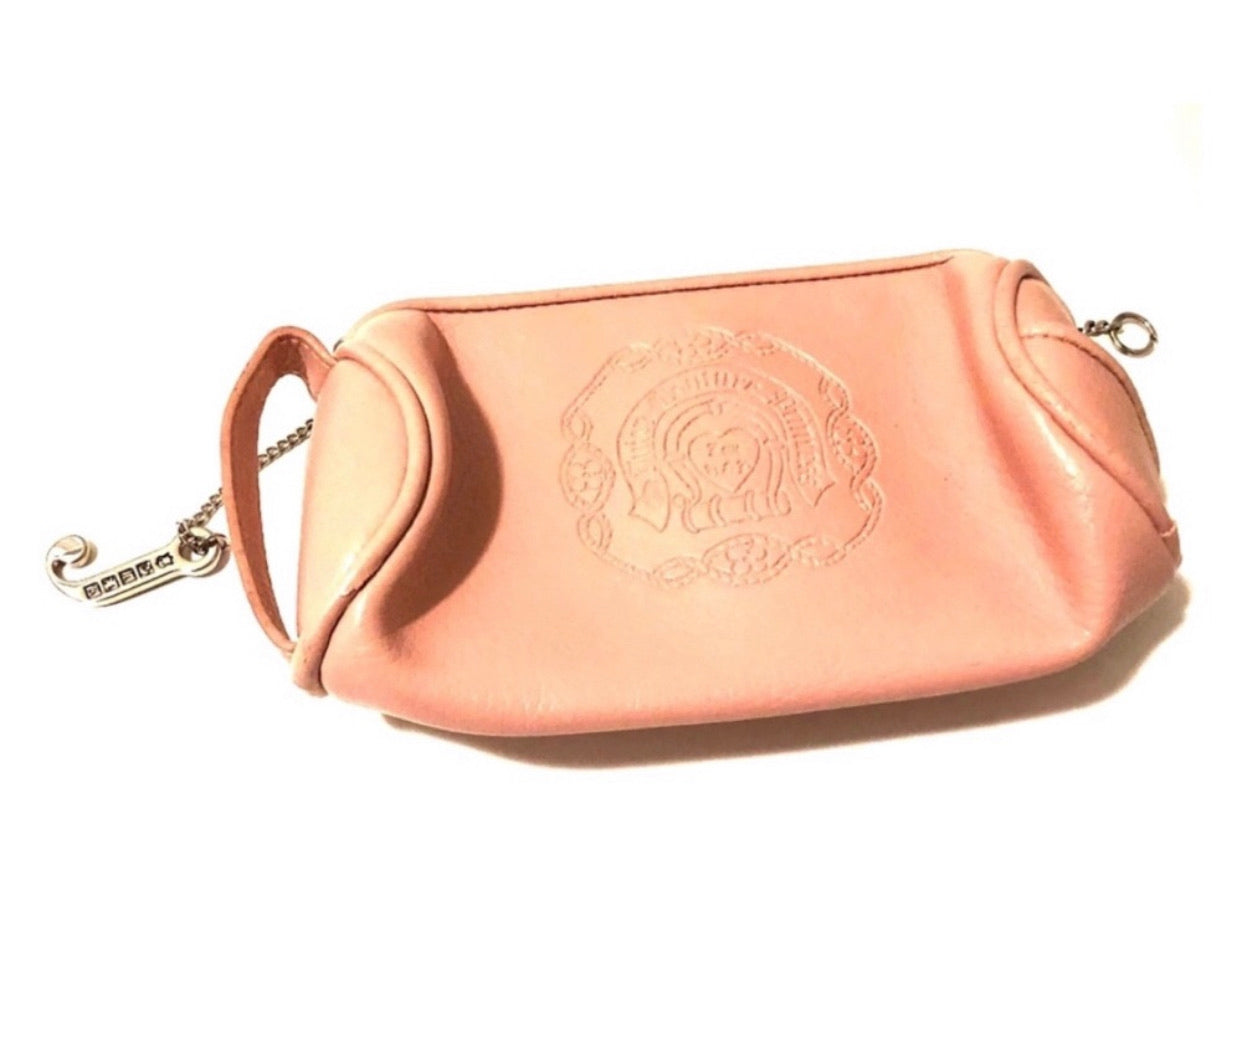 Juicy Couture pink wristlet